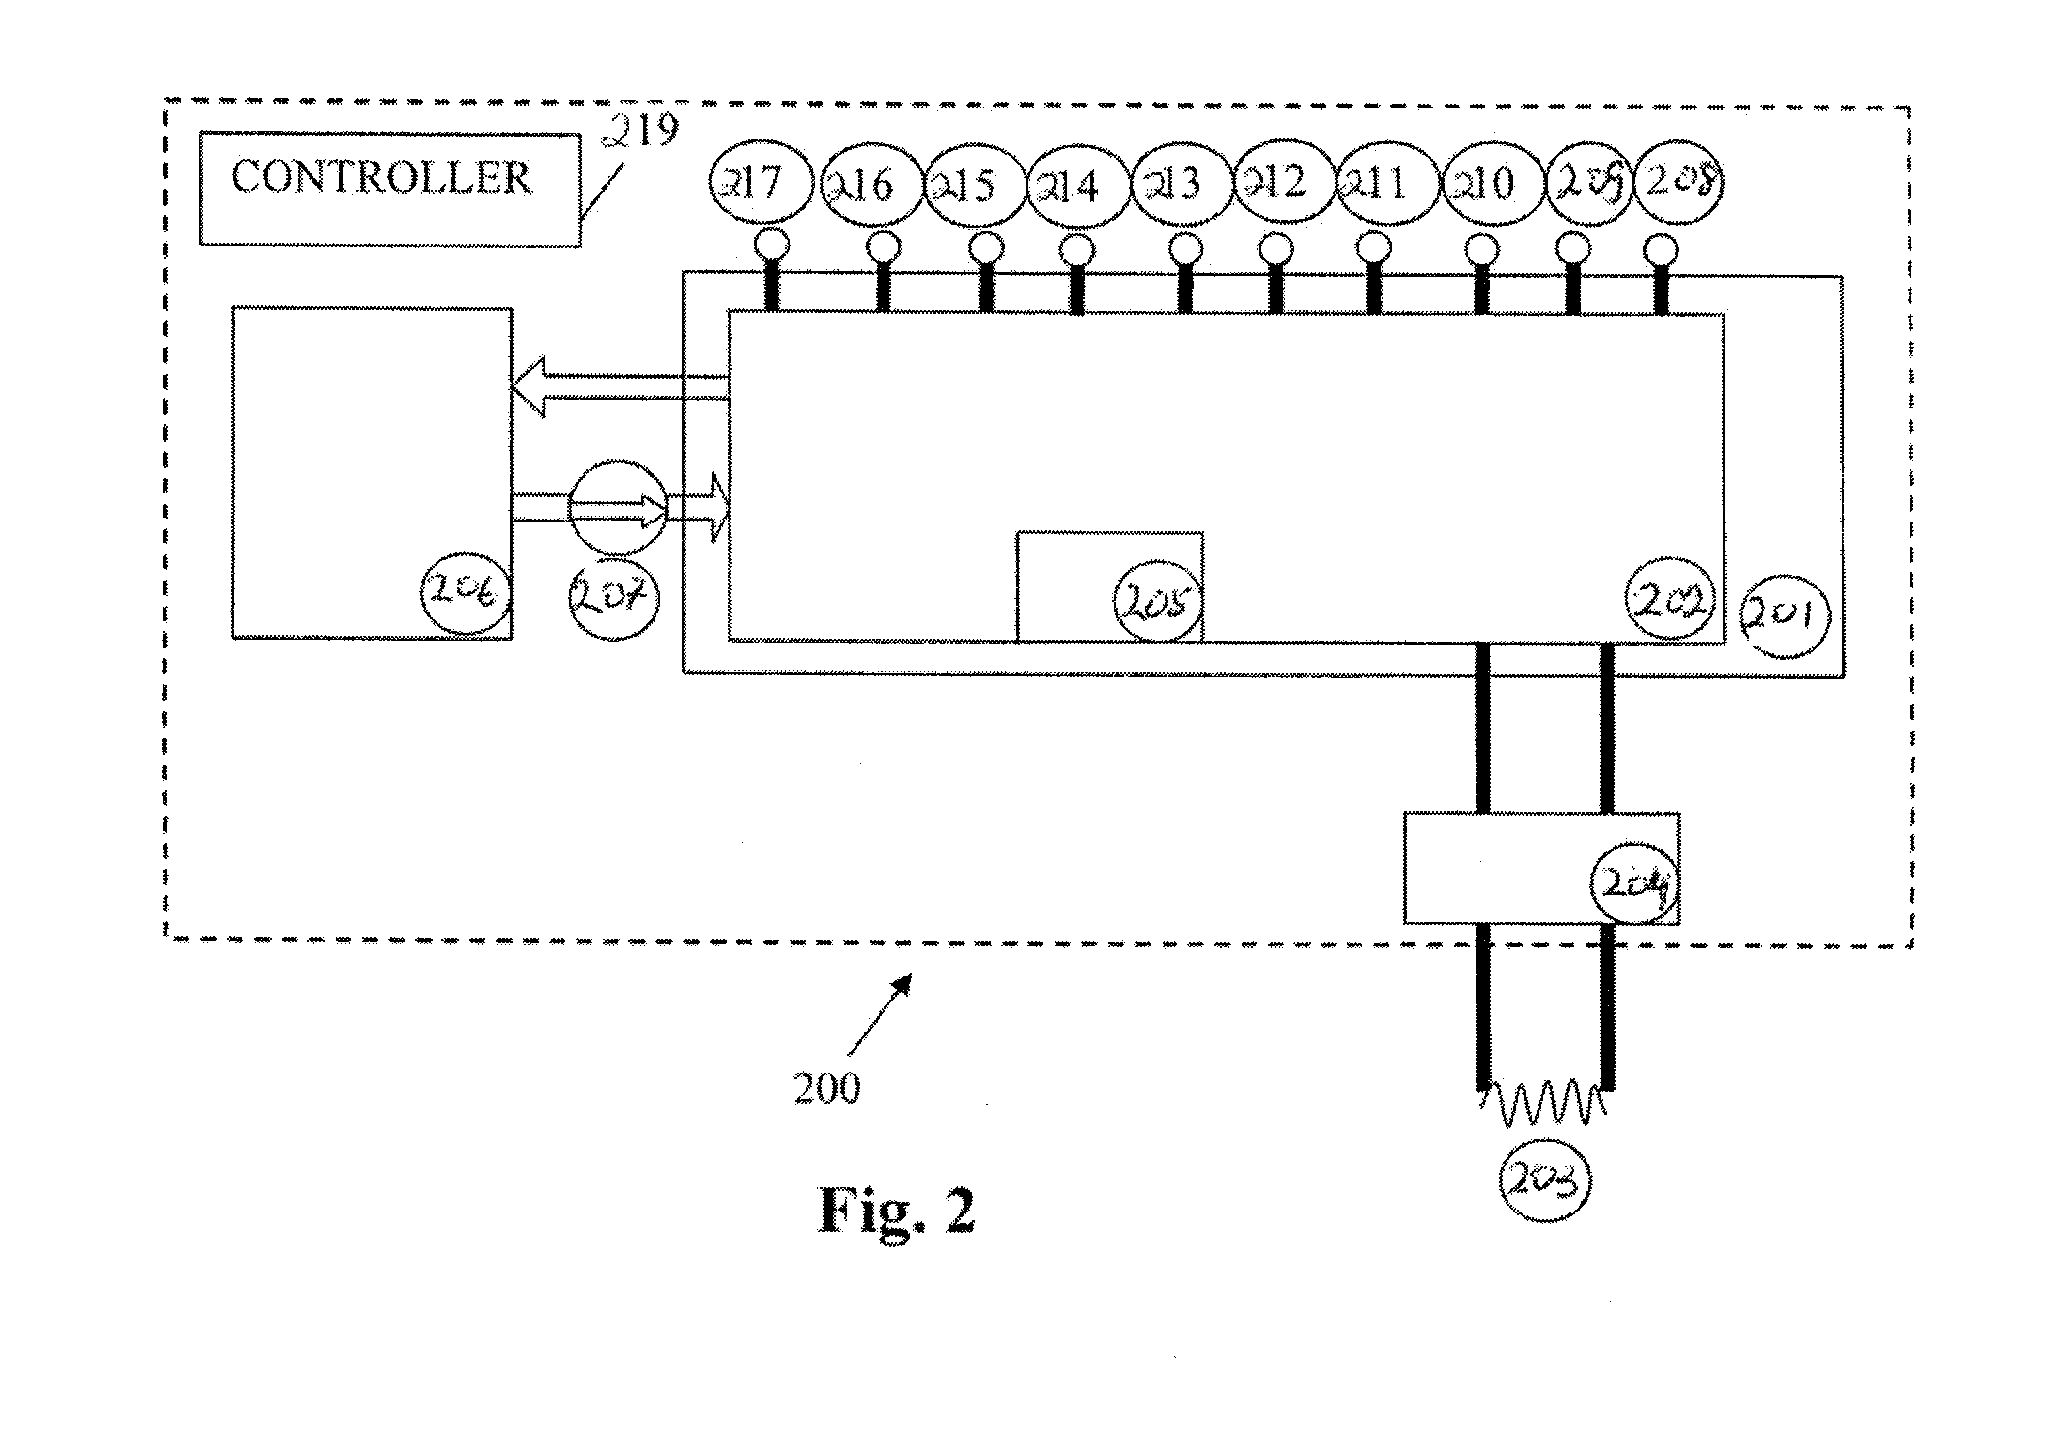 System and method for controlling operation of a metal-air battery